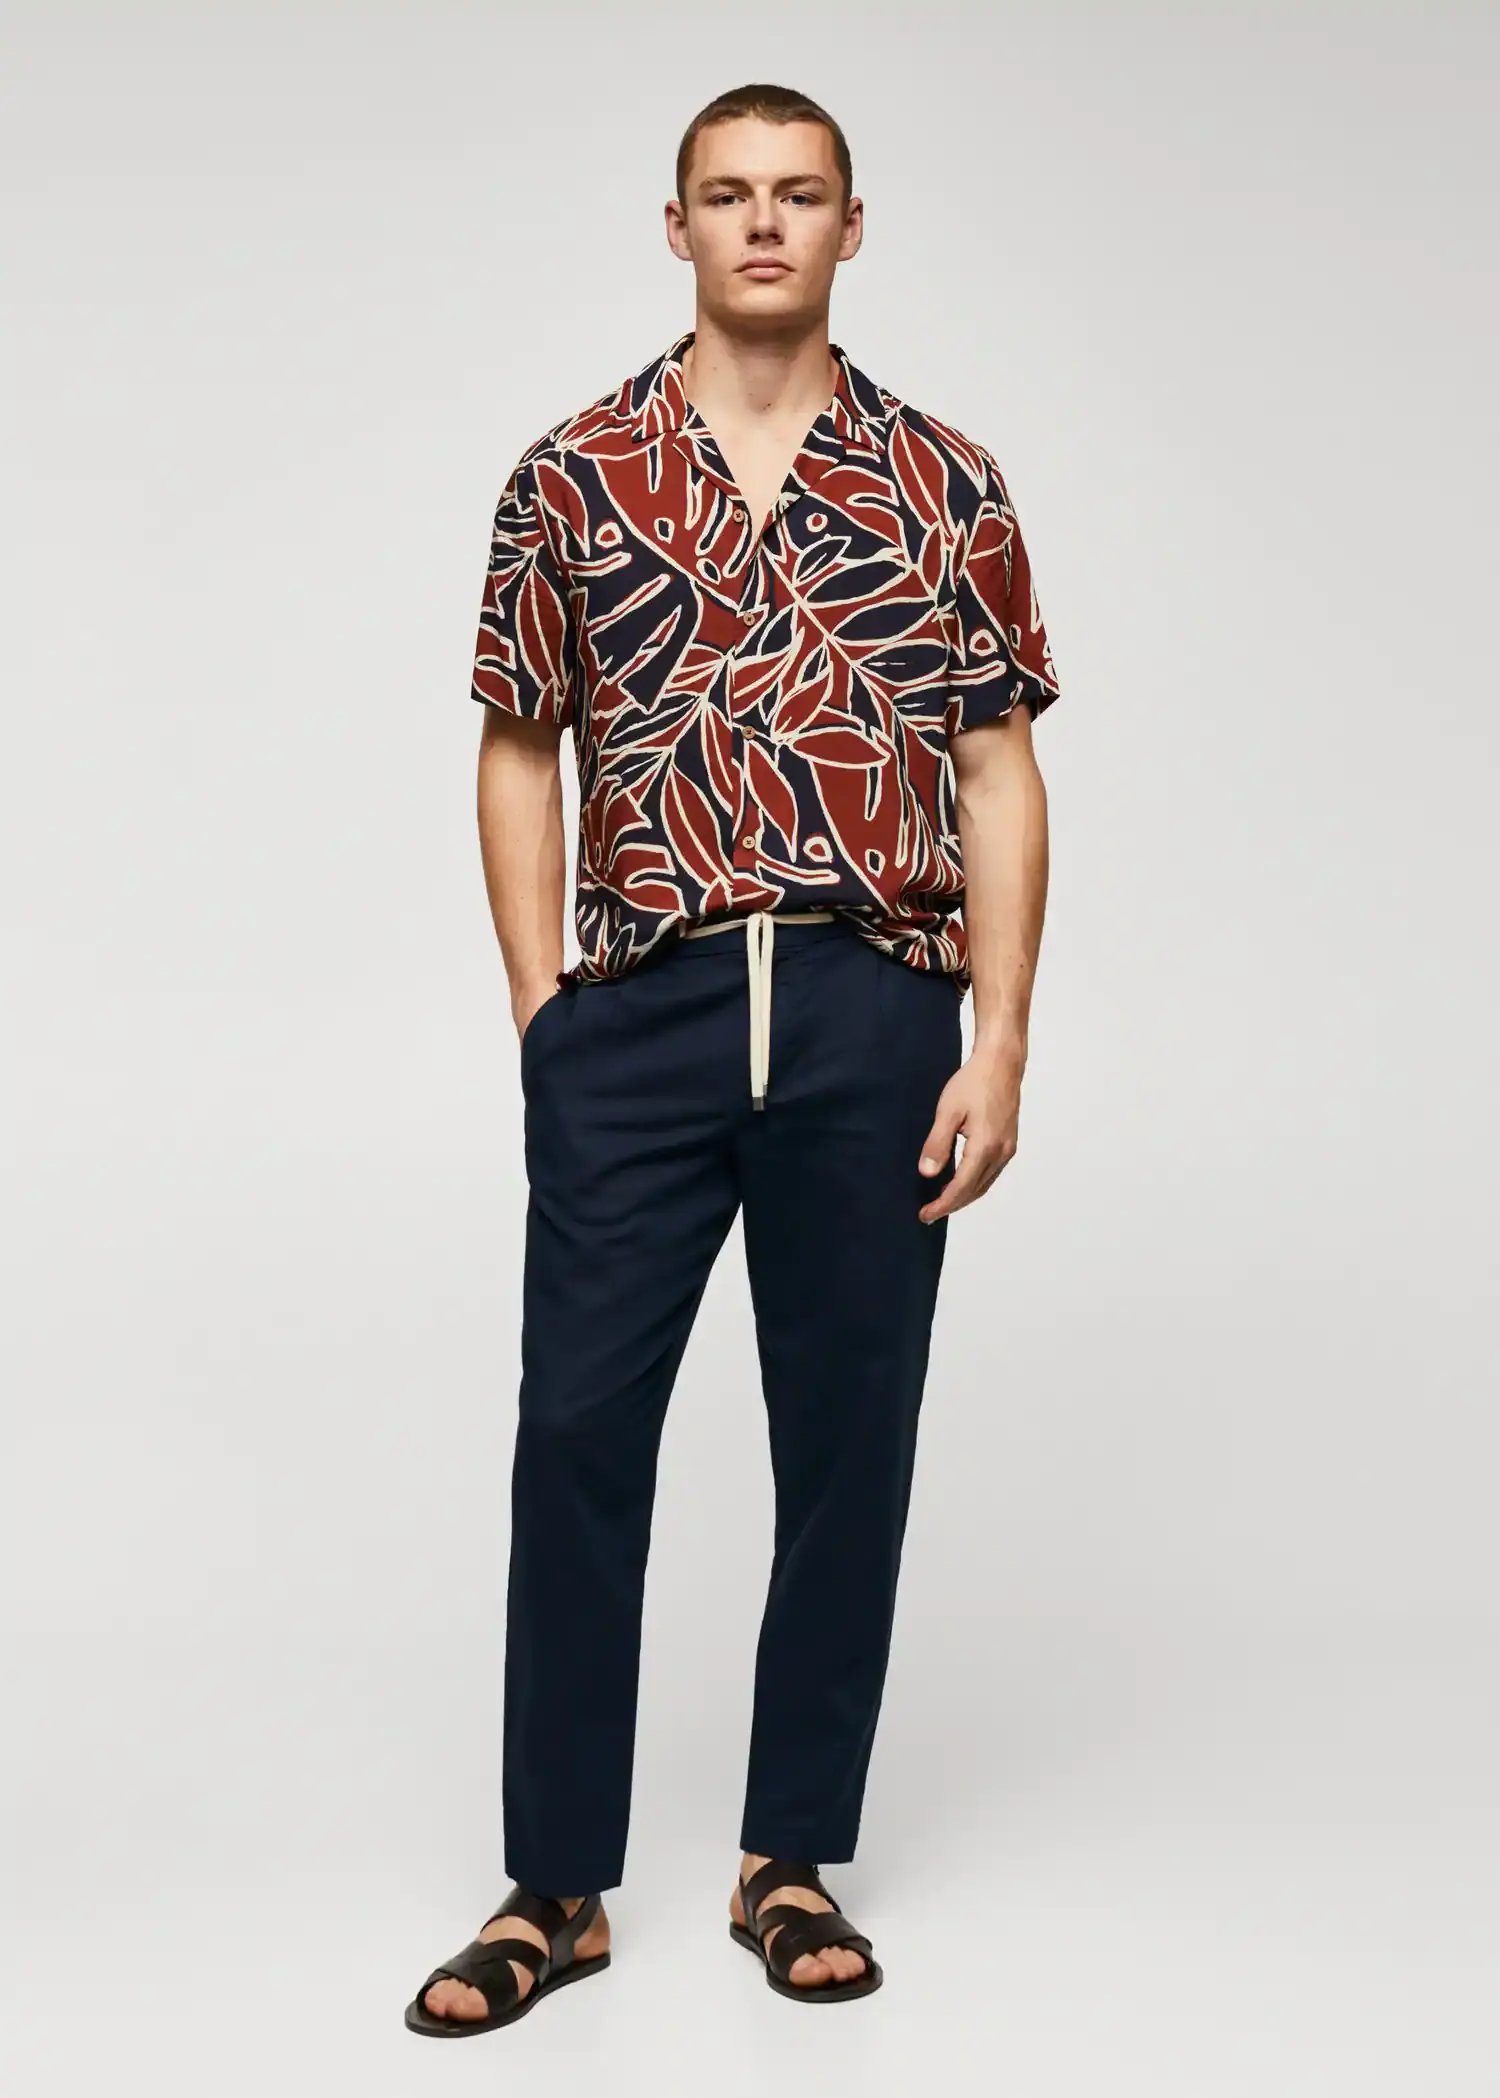 Mango Bowling shirt with leaf print. a man wearing a red and black shirt and black pants. 